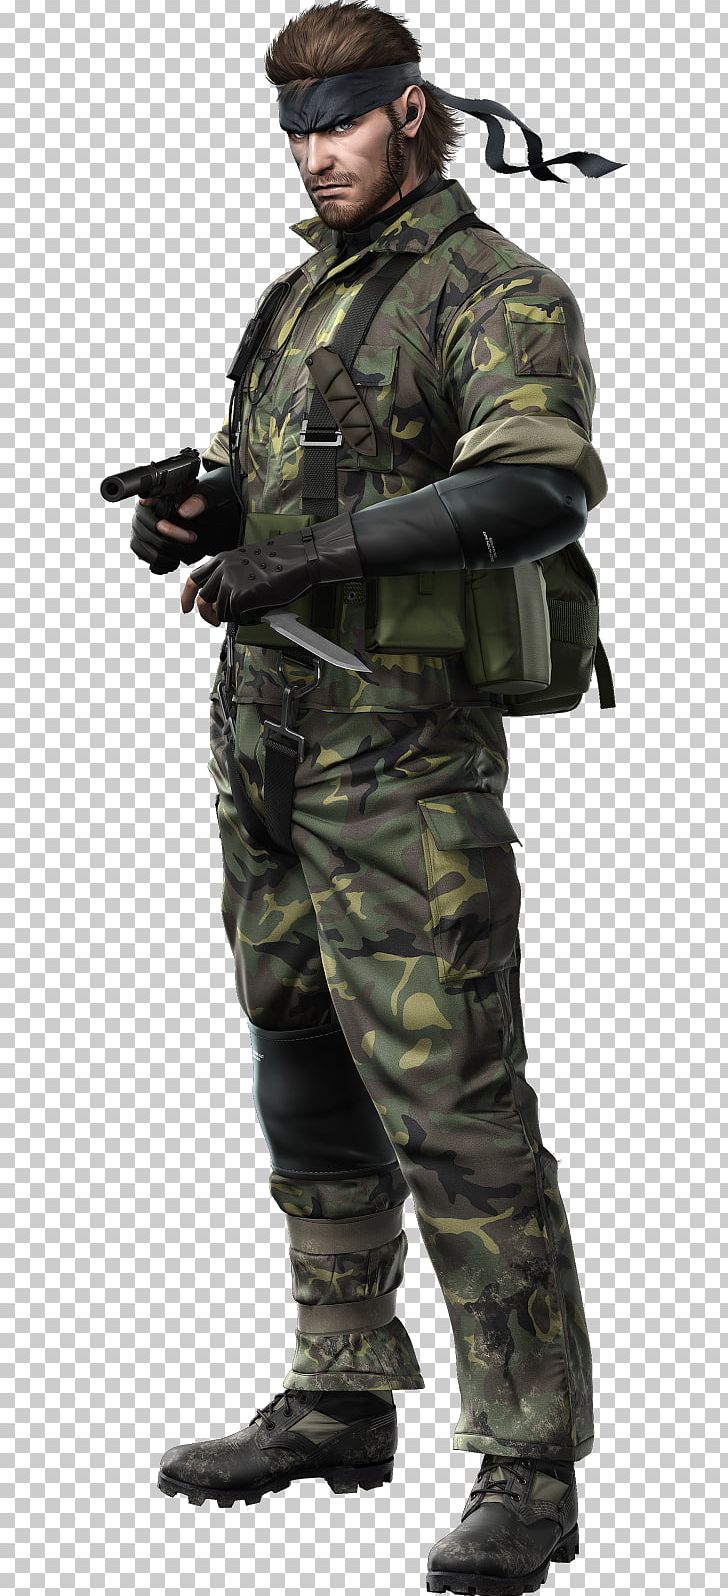 Metal Gear Solid 3: Snake Eater Metal Gear 2: Solid Snake Metal Gear Solid V: The Phantom Pain Metal Gear Solid: The Twin Snakes PNG, Clipart, Army, Big Boss, Big Pants, Infantry, Military Free PNG Download